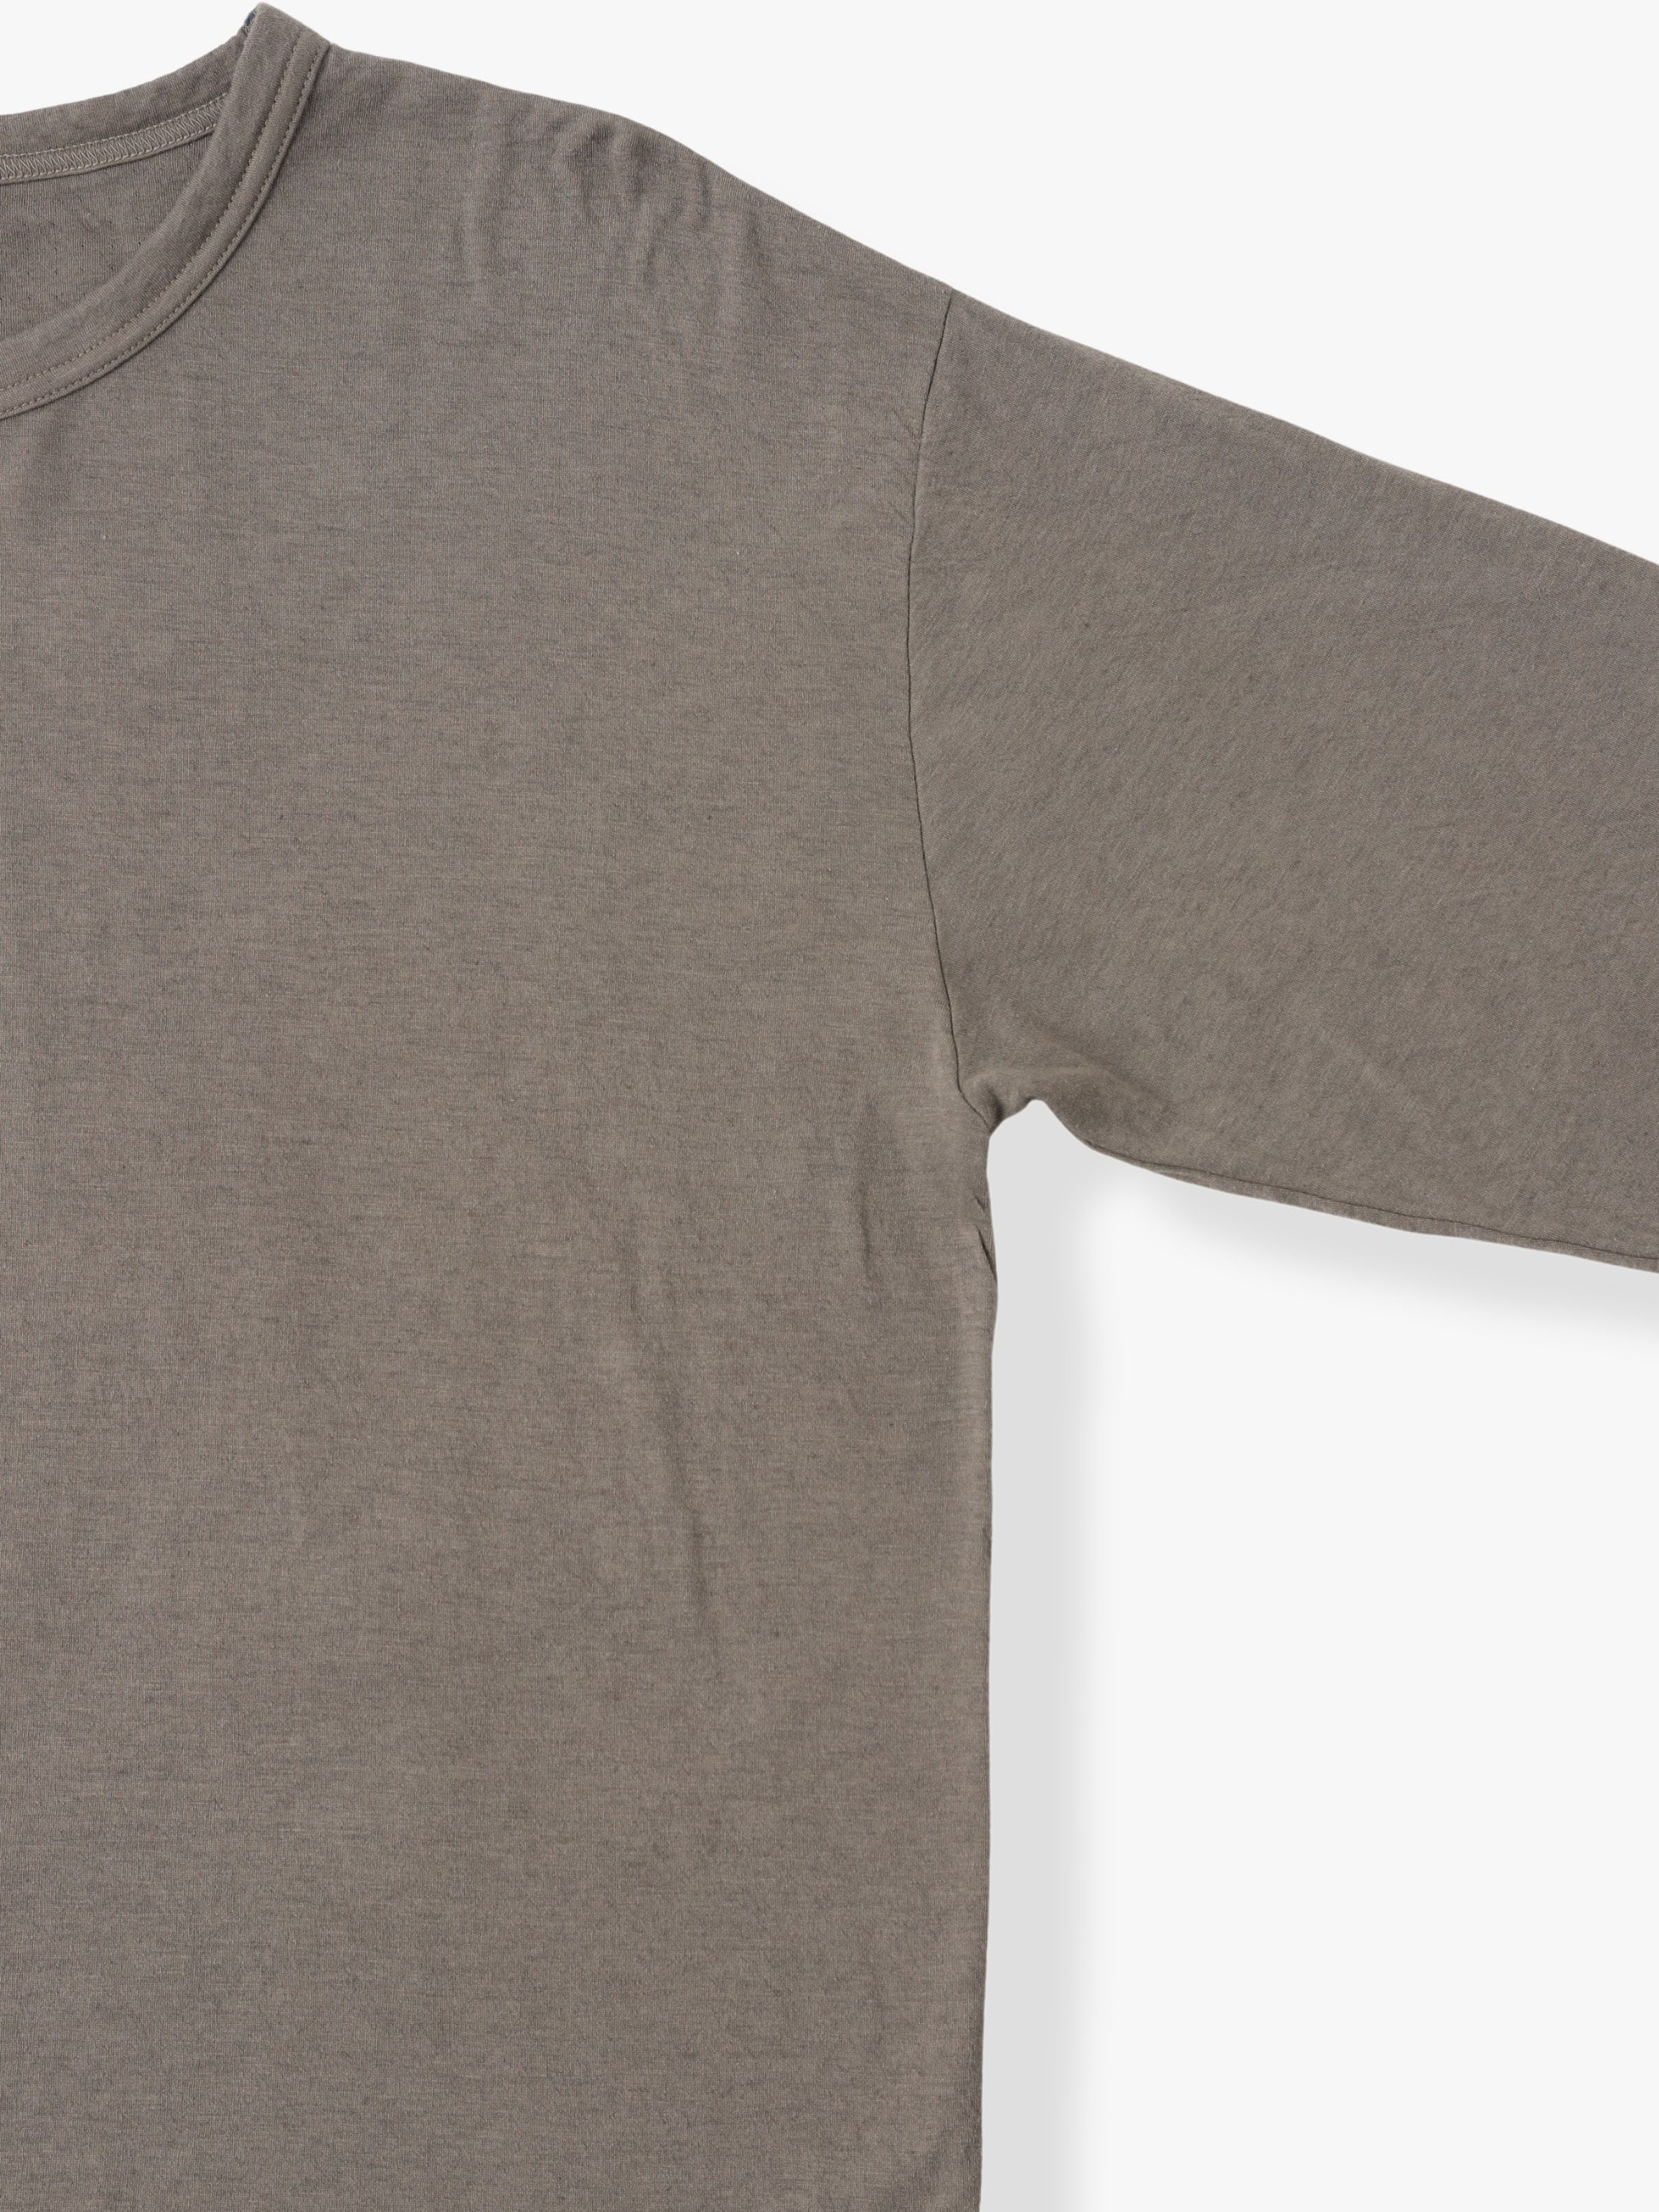 Cotton Cashmere Double Cloth Long Sleeve Tee｜Ron Herman(ロン